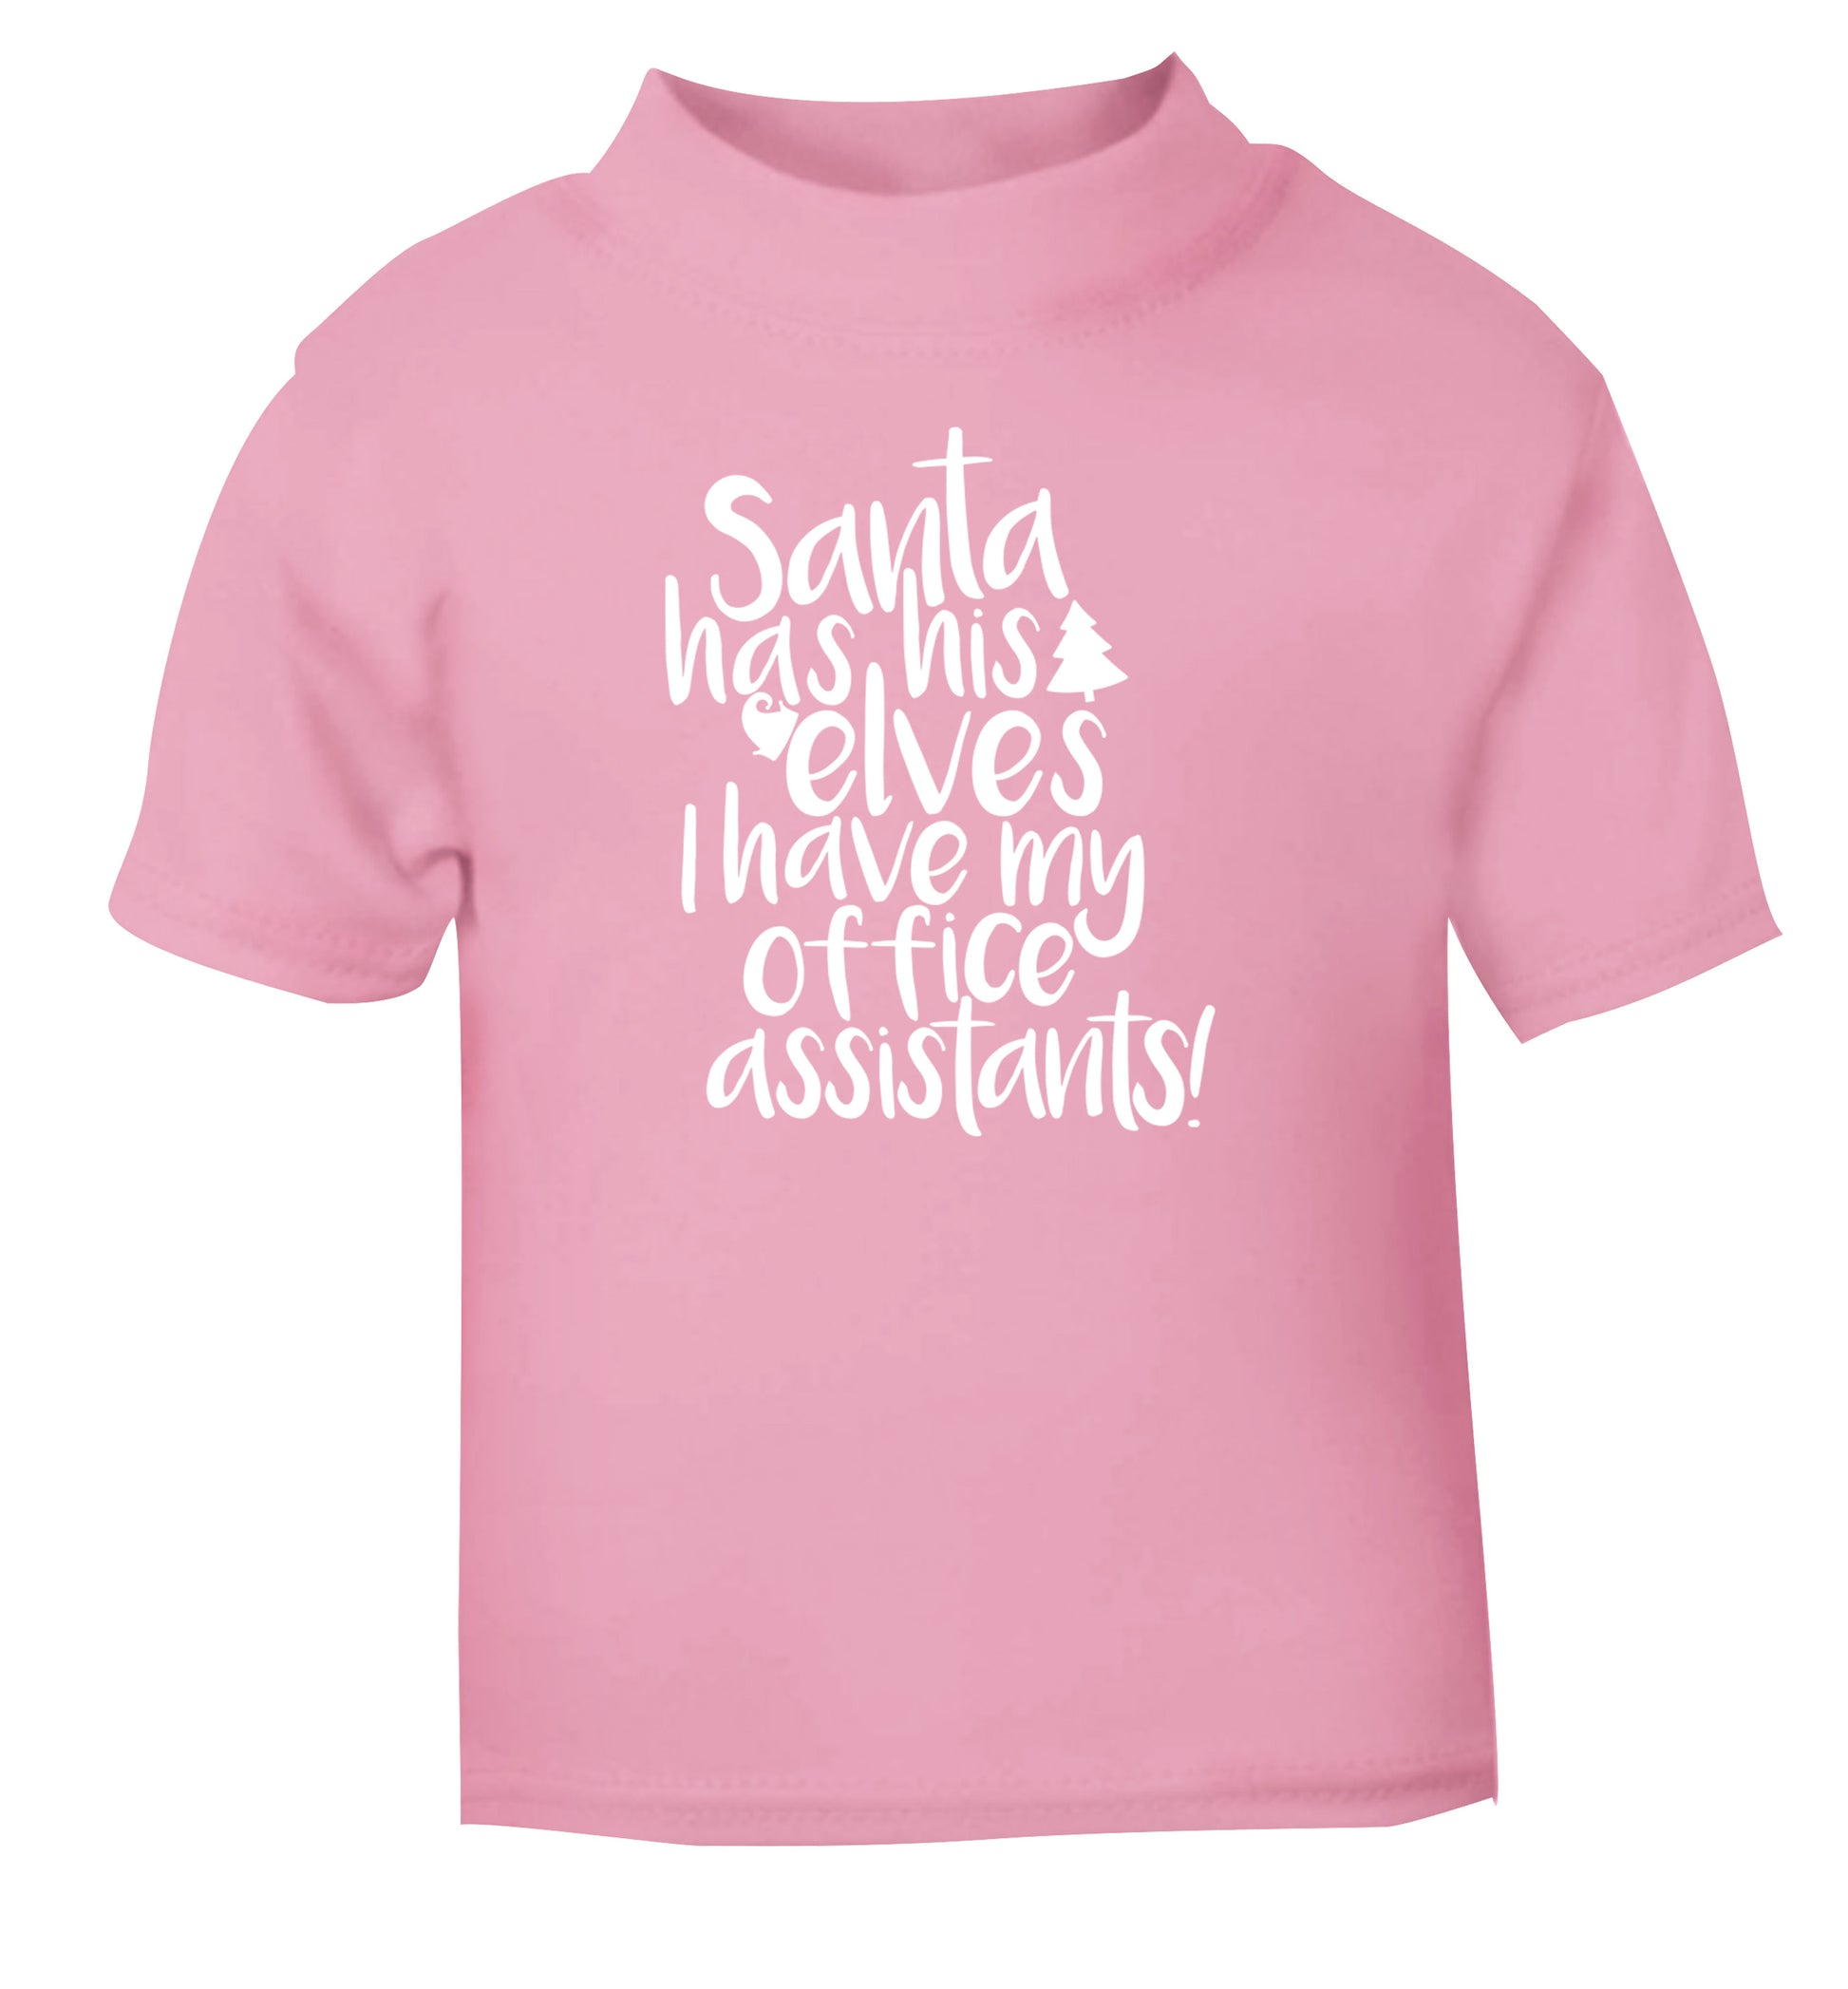 Santa has elves I have office assistants light pink Baby Toddler Tshirt 2 Years